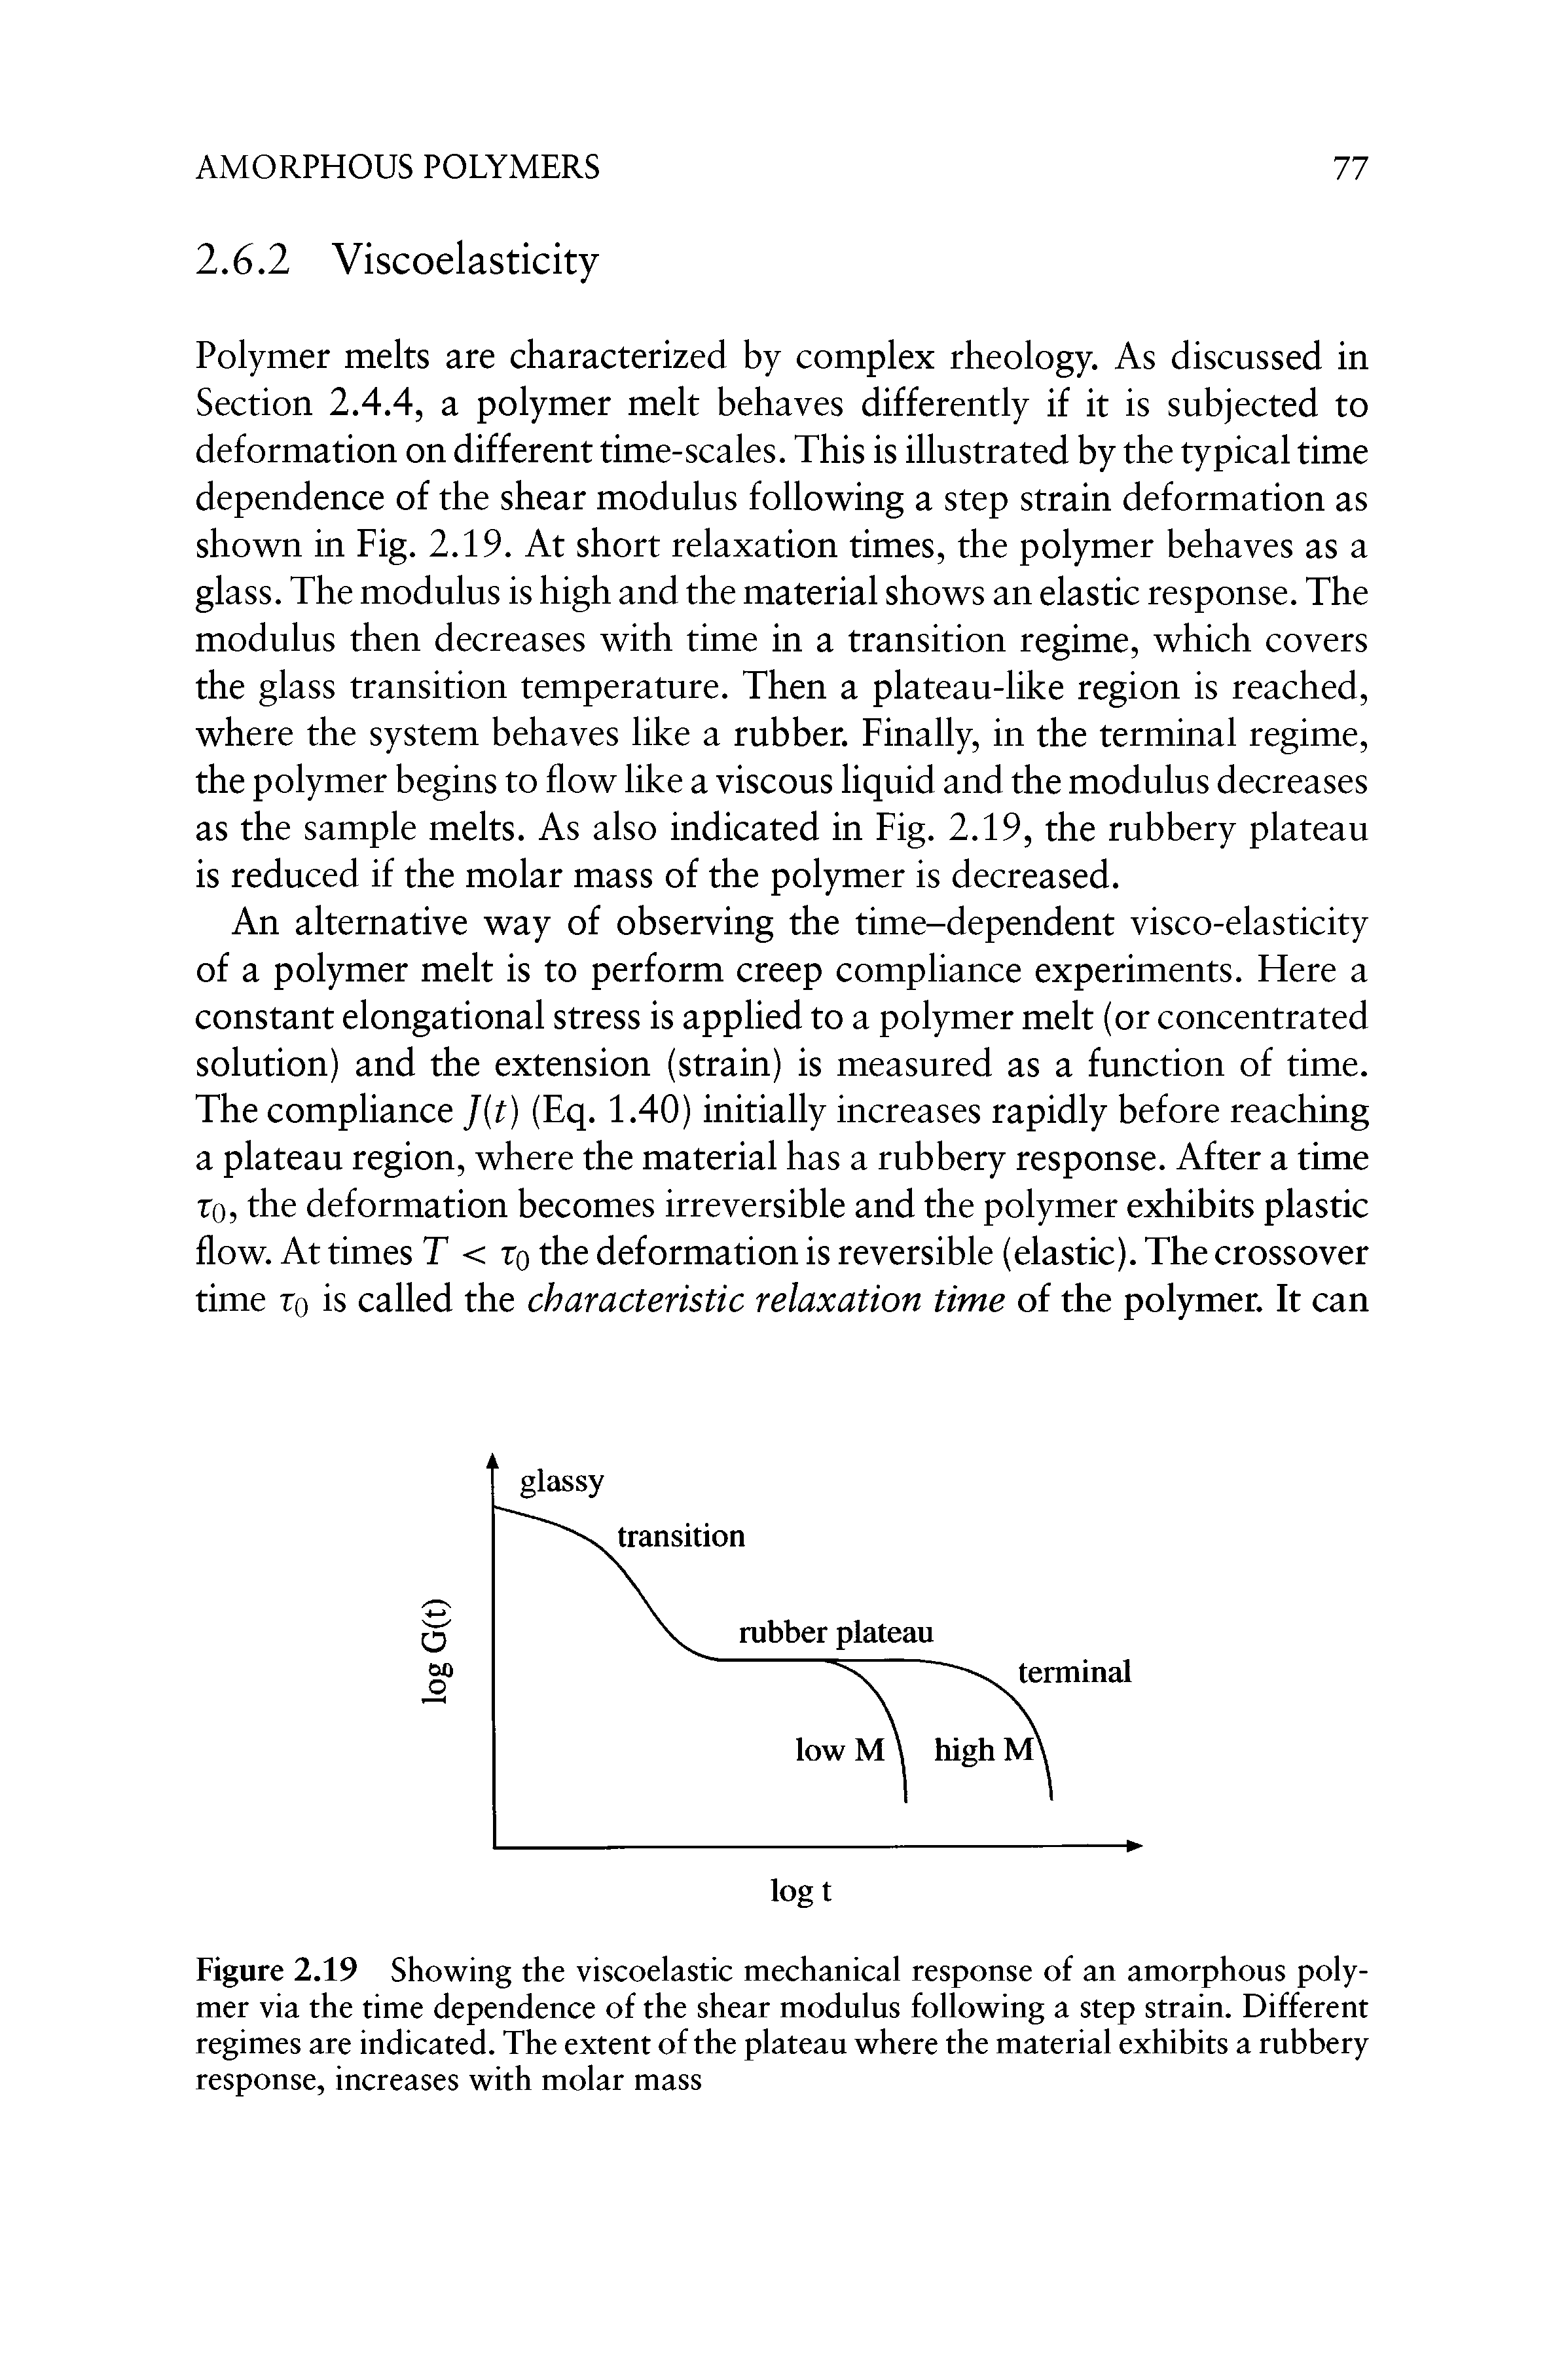 Figure 2.19 Showing the viscoelastic mechanical response of an amorphous polymer via the time dependence of the shear modulus following a step strain. Different regimes are indicated. The extent of the plateau where the material exhibits a rubbery response, increases with molar mass...